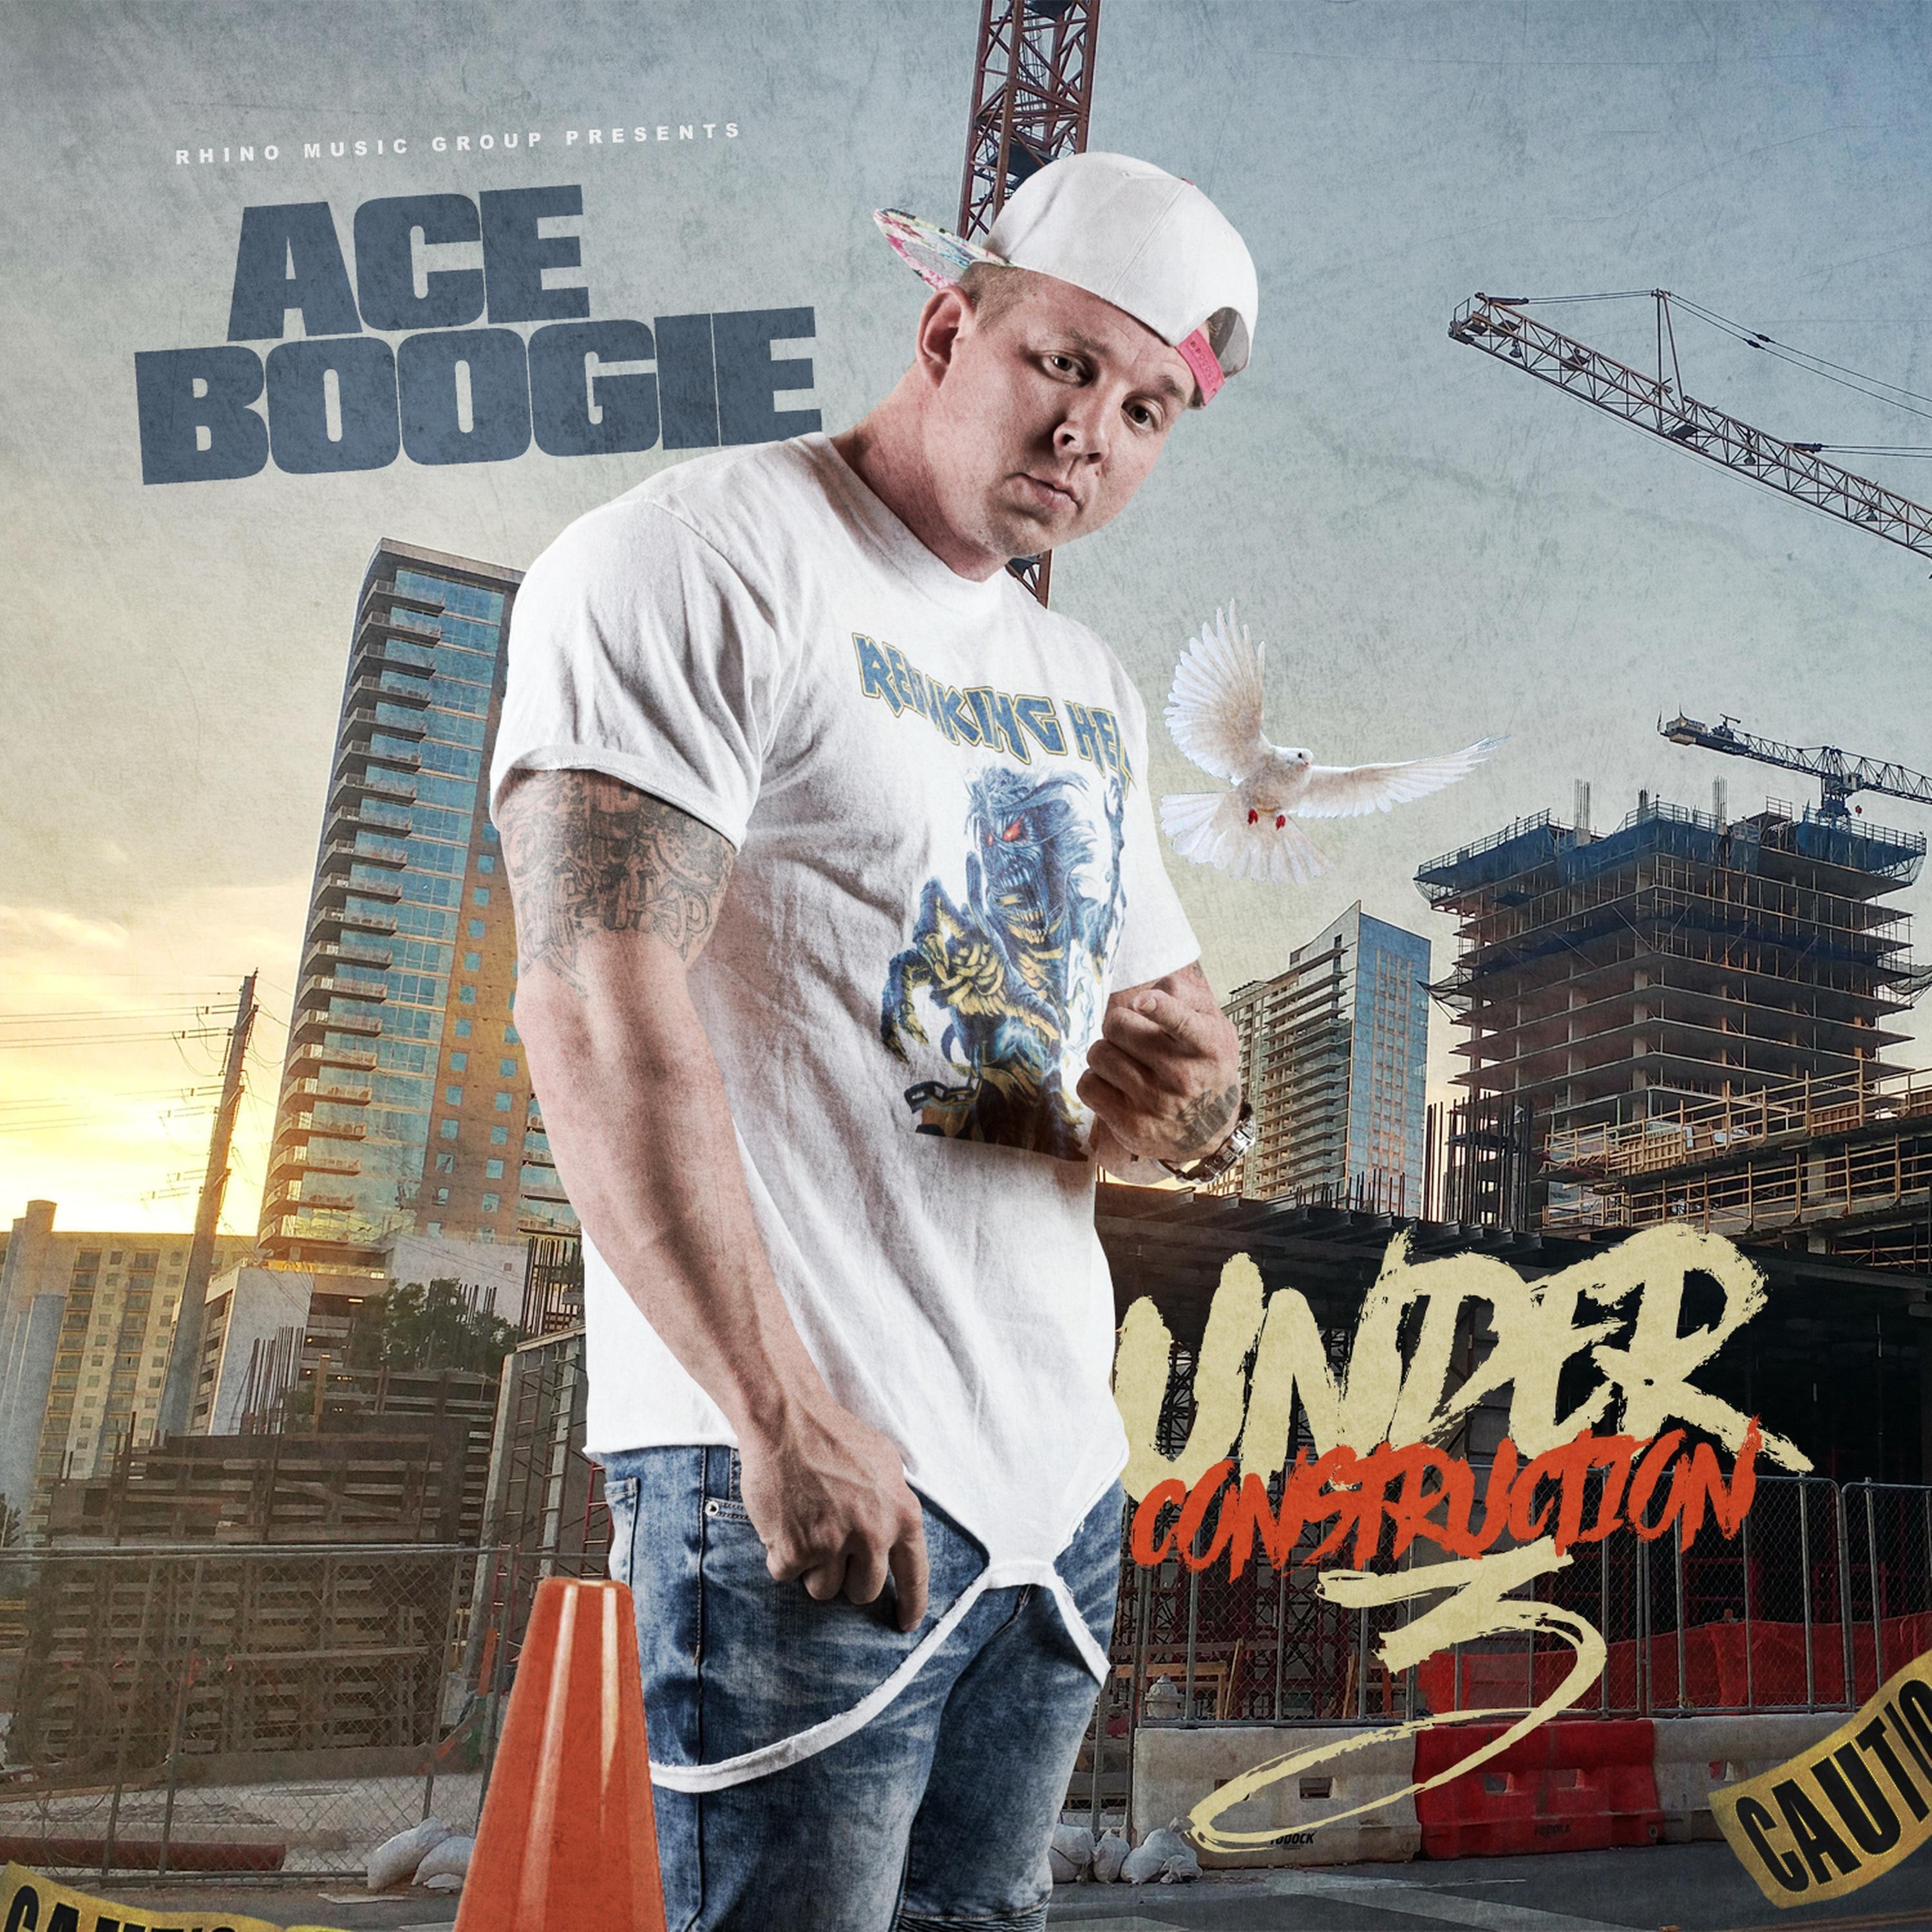 Ace Boogie Events ReverbNation.